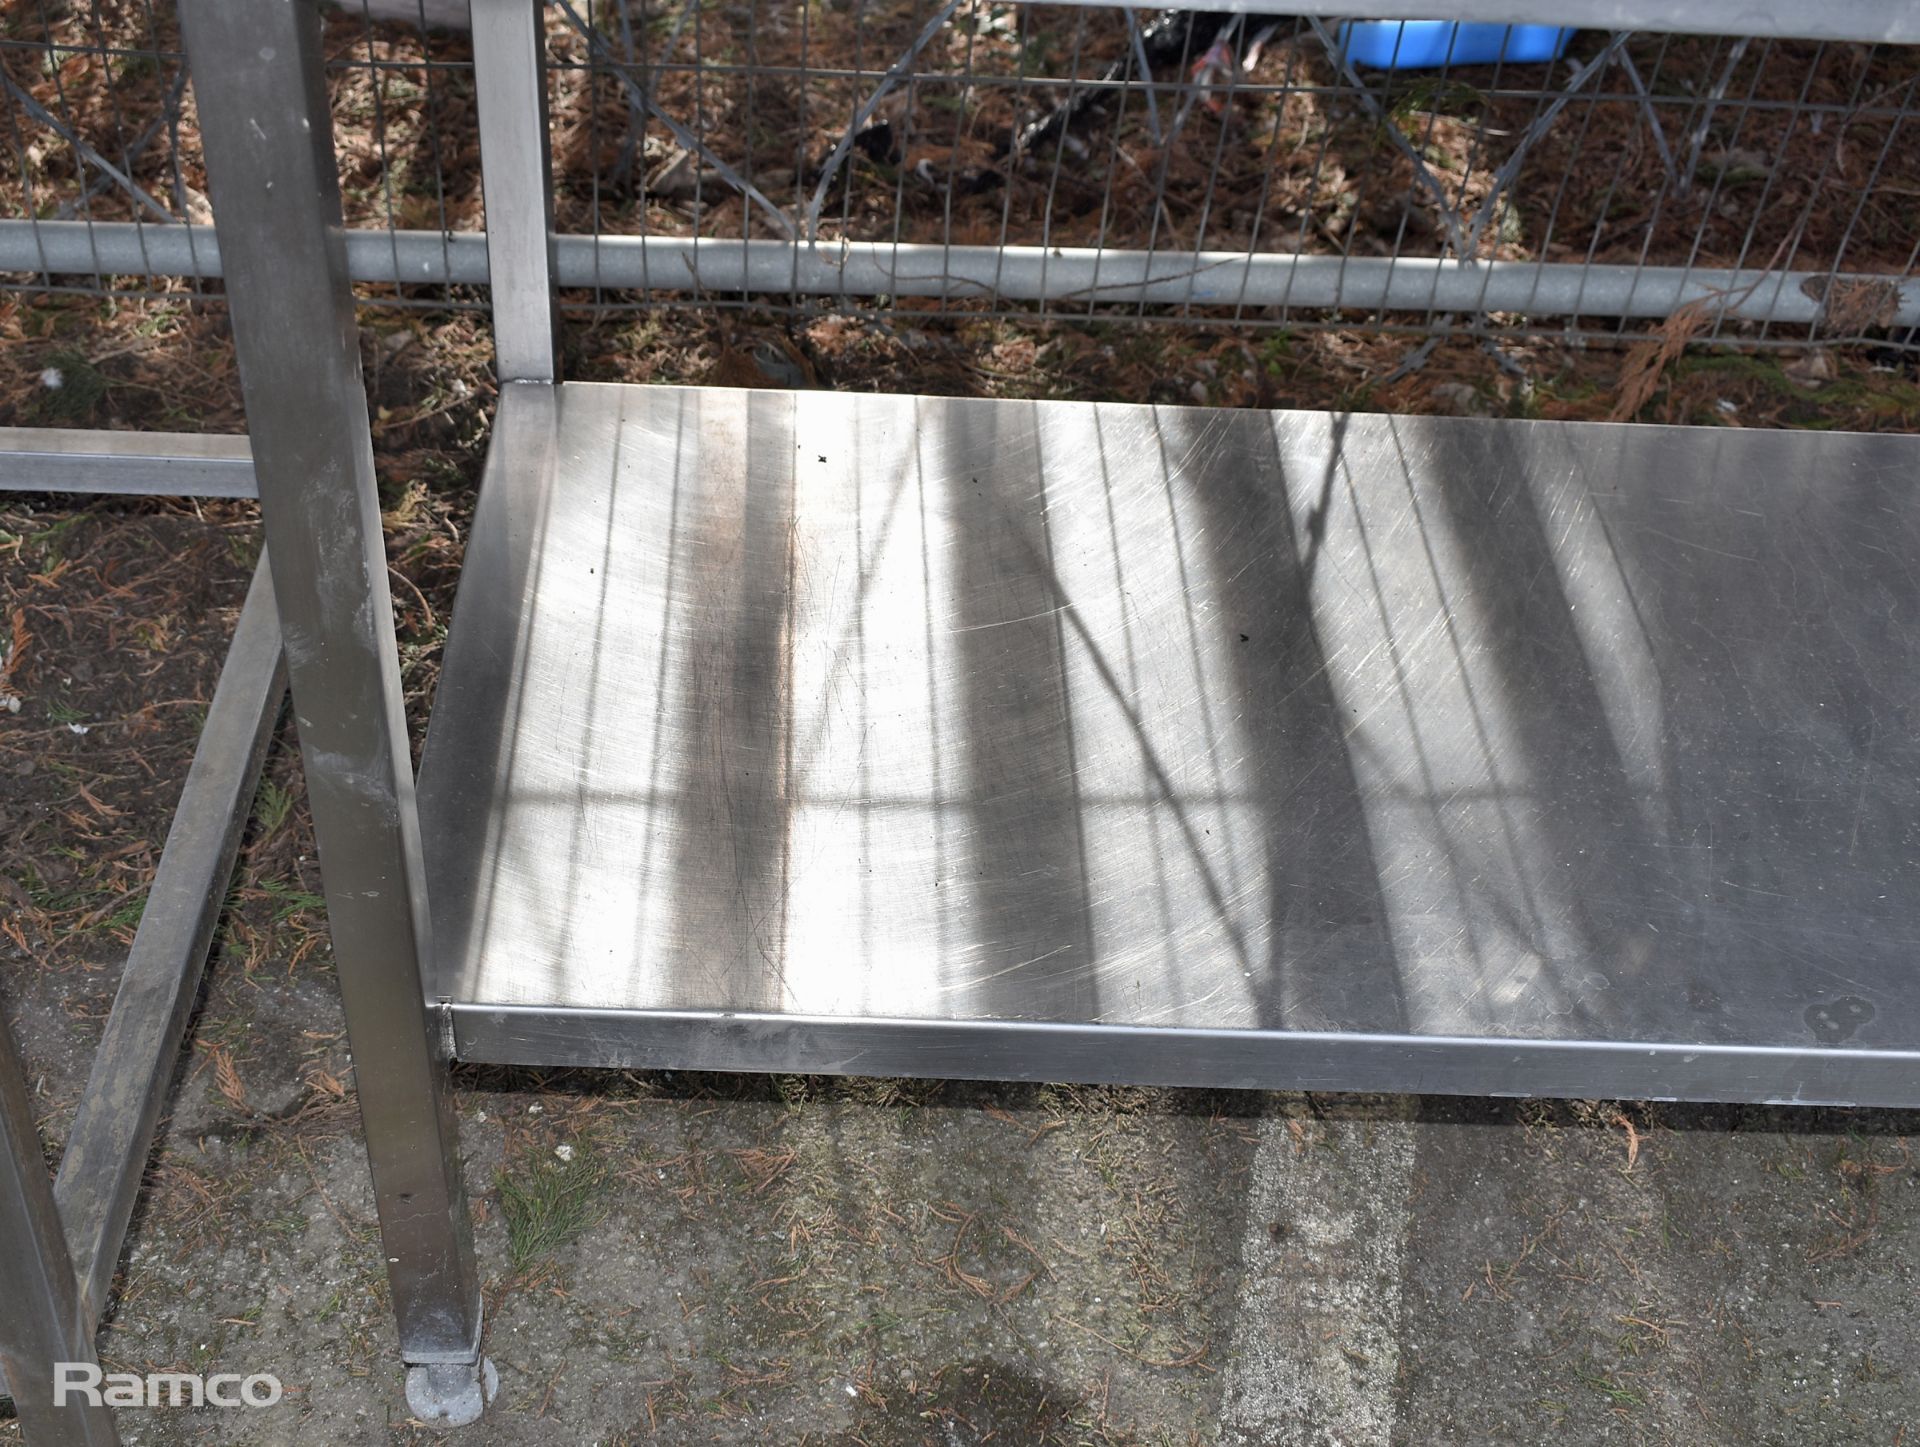 Stainless steel draining table - L 124 x W 89 x H 97cm, Stainless steel table with bottom shelf - Image 4 of 9